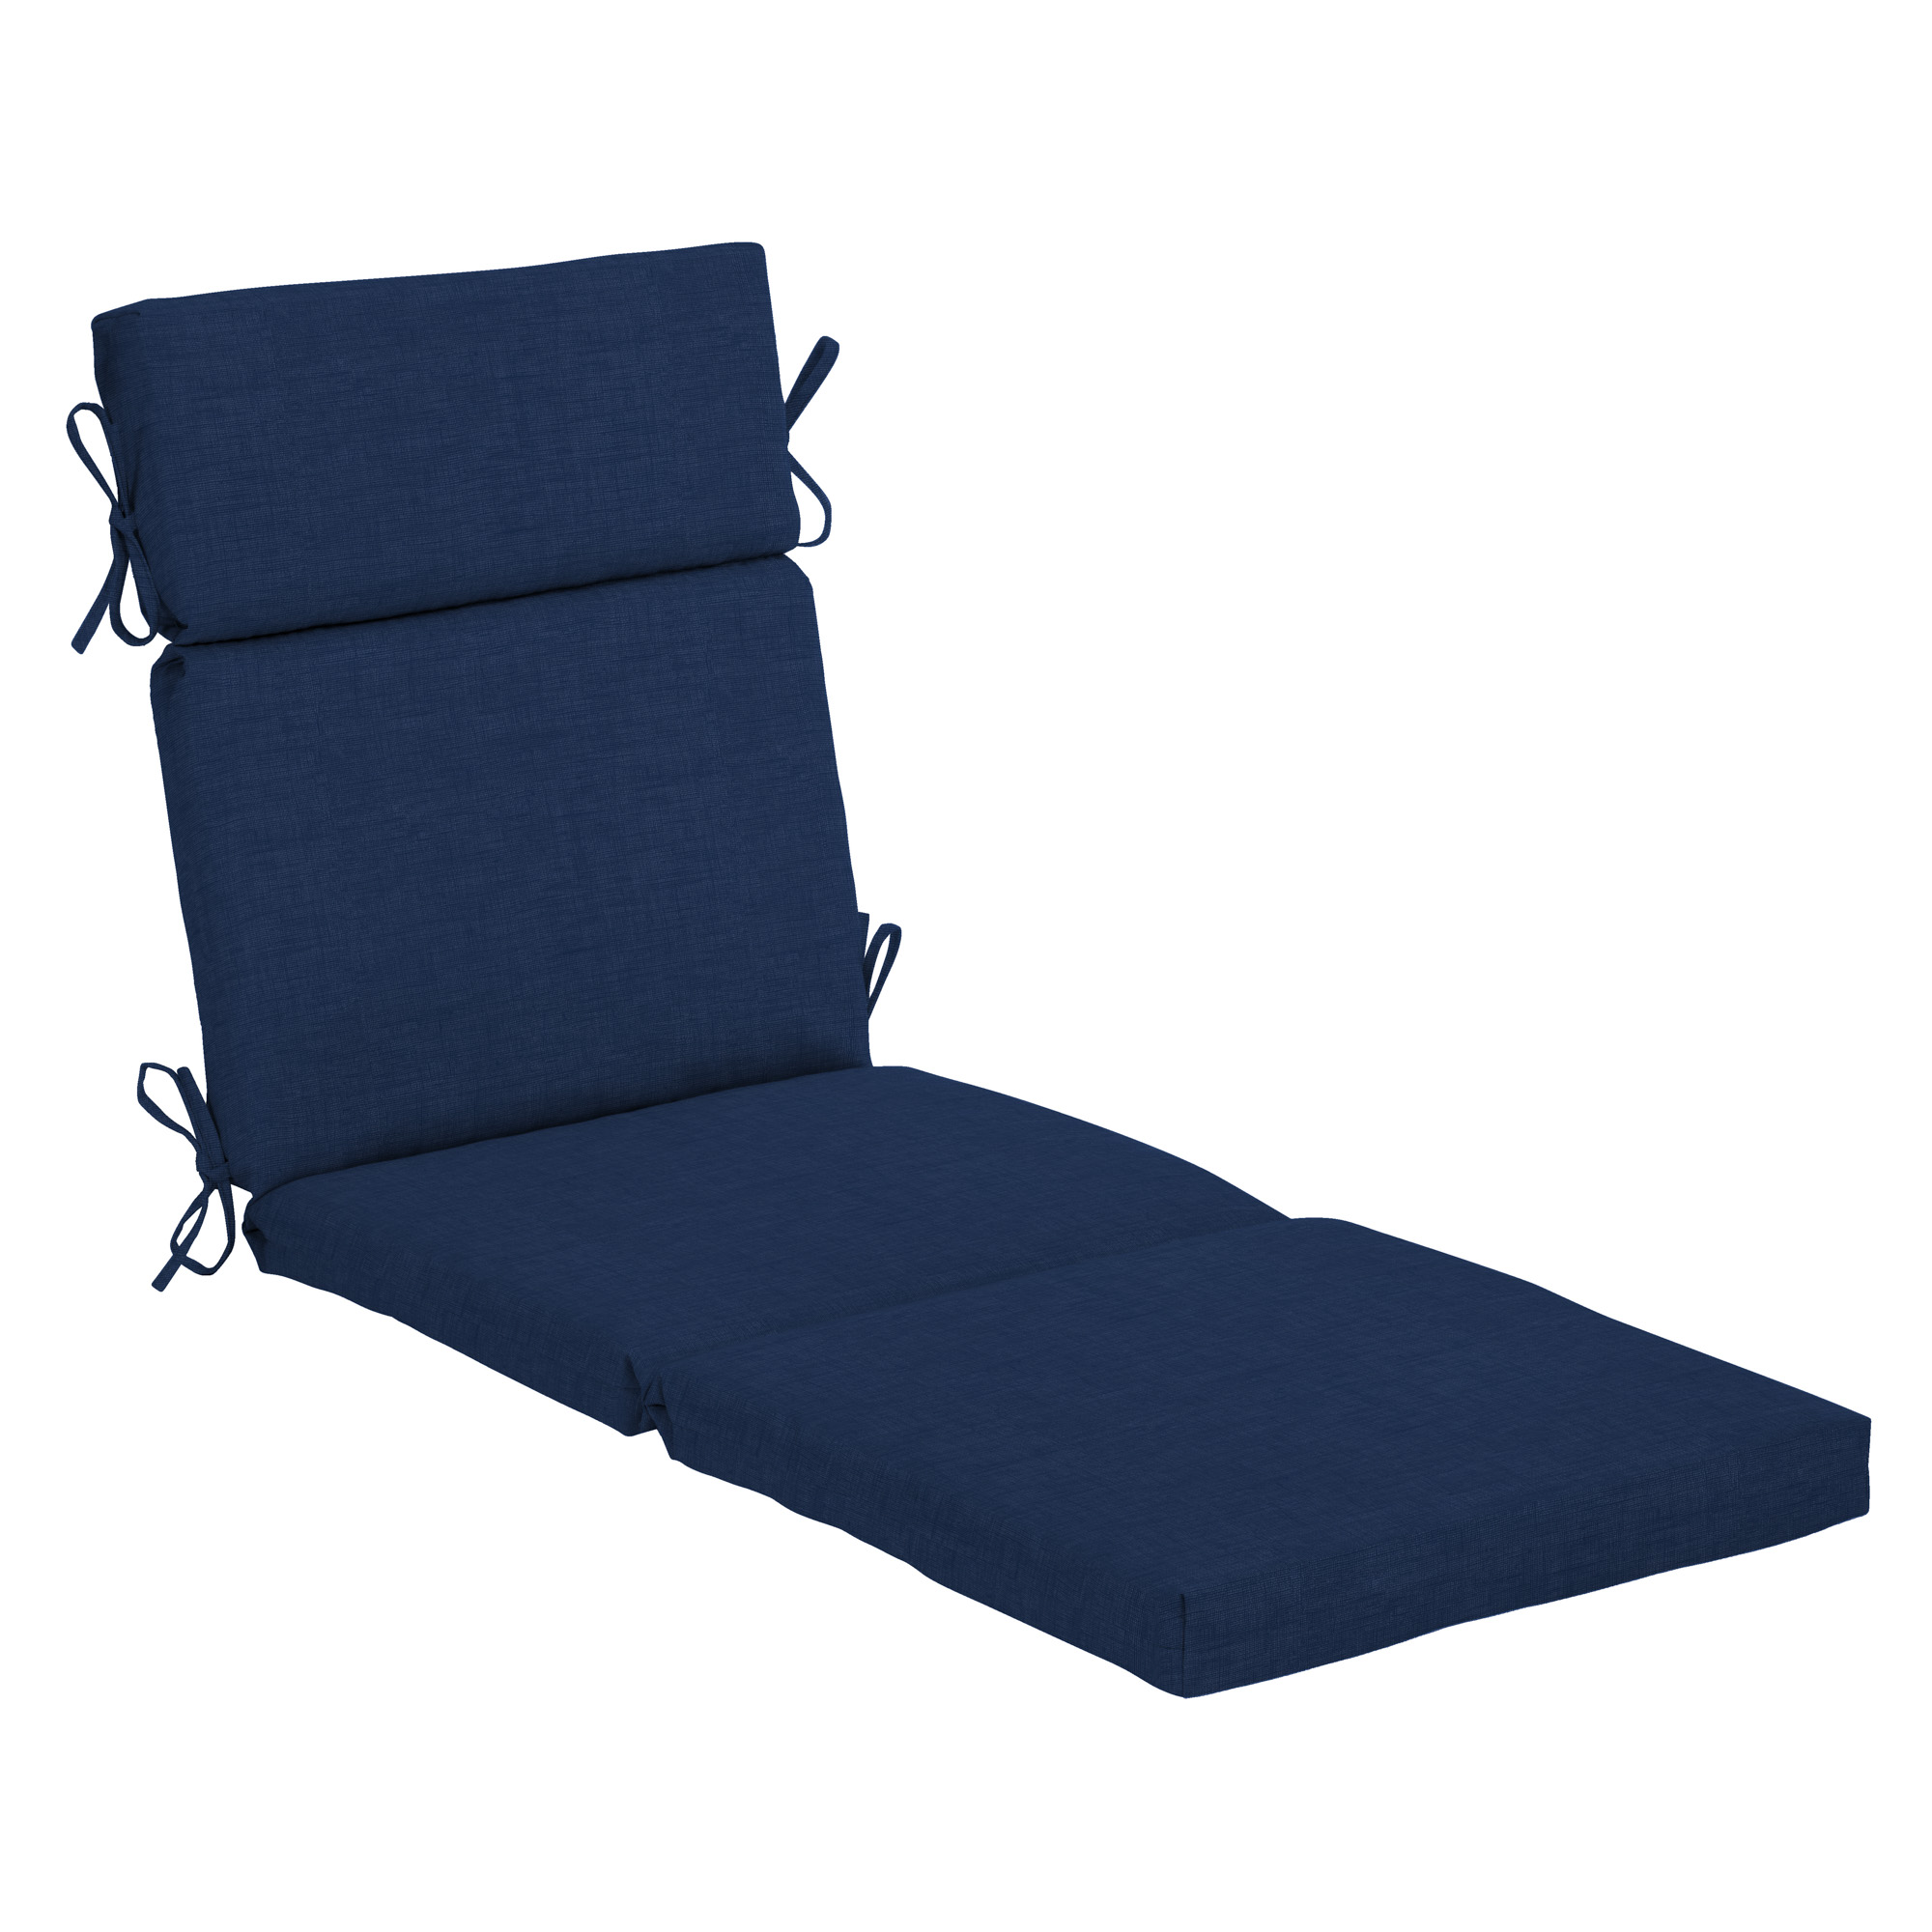 Arden Selections Outdoor Chaise Lounge Cushion 22 x 77, Sapphire Blue Leala - image 1 of 10